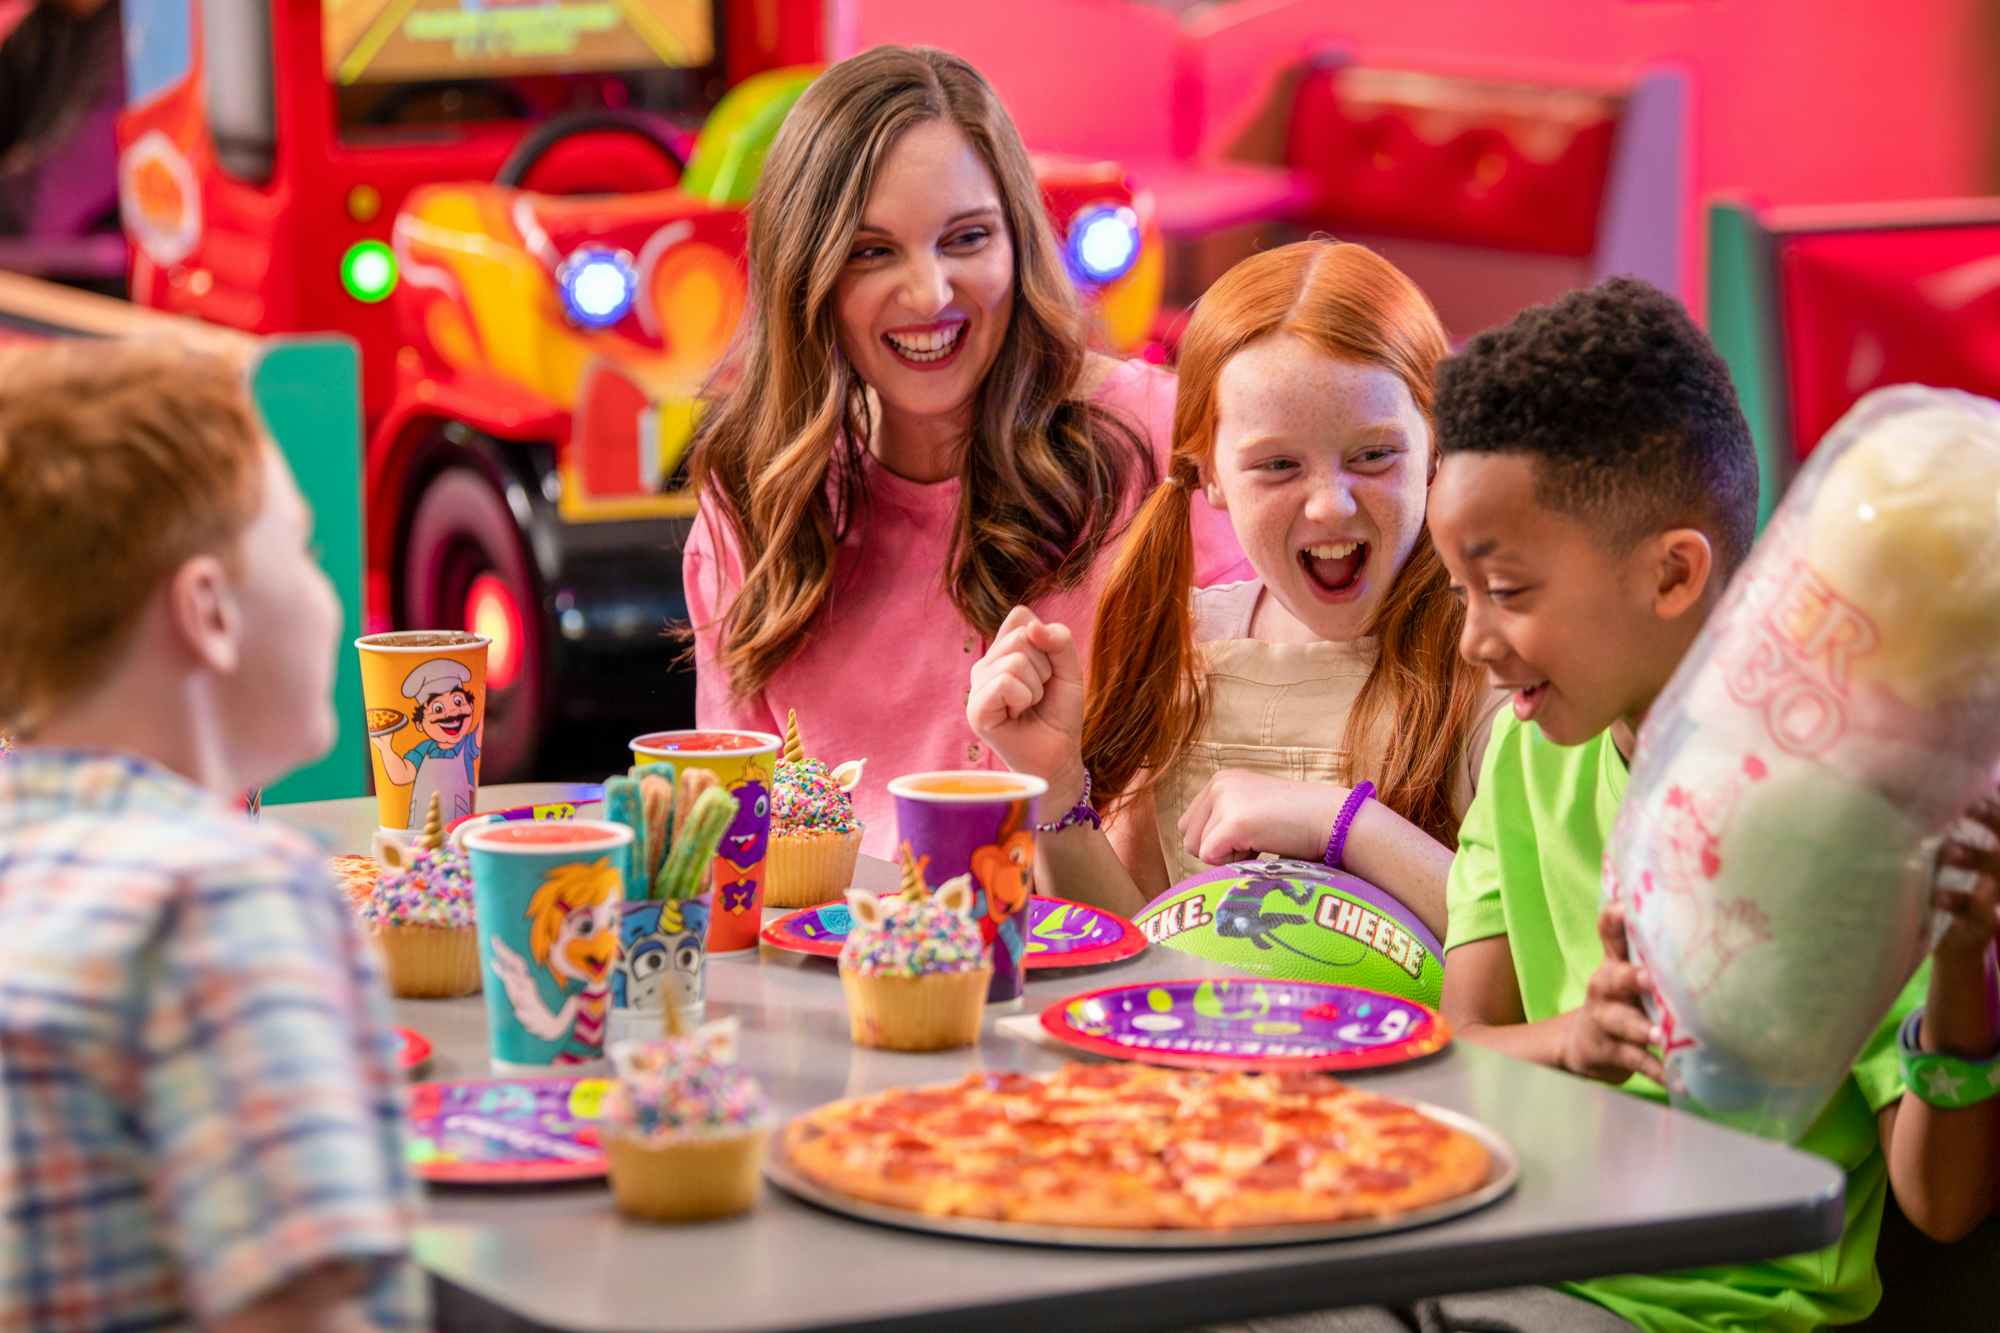 chuck-e-cheese-birthday-party-childrens-parties-kids-official-media-1